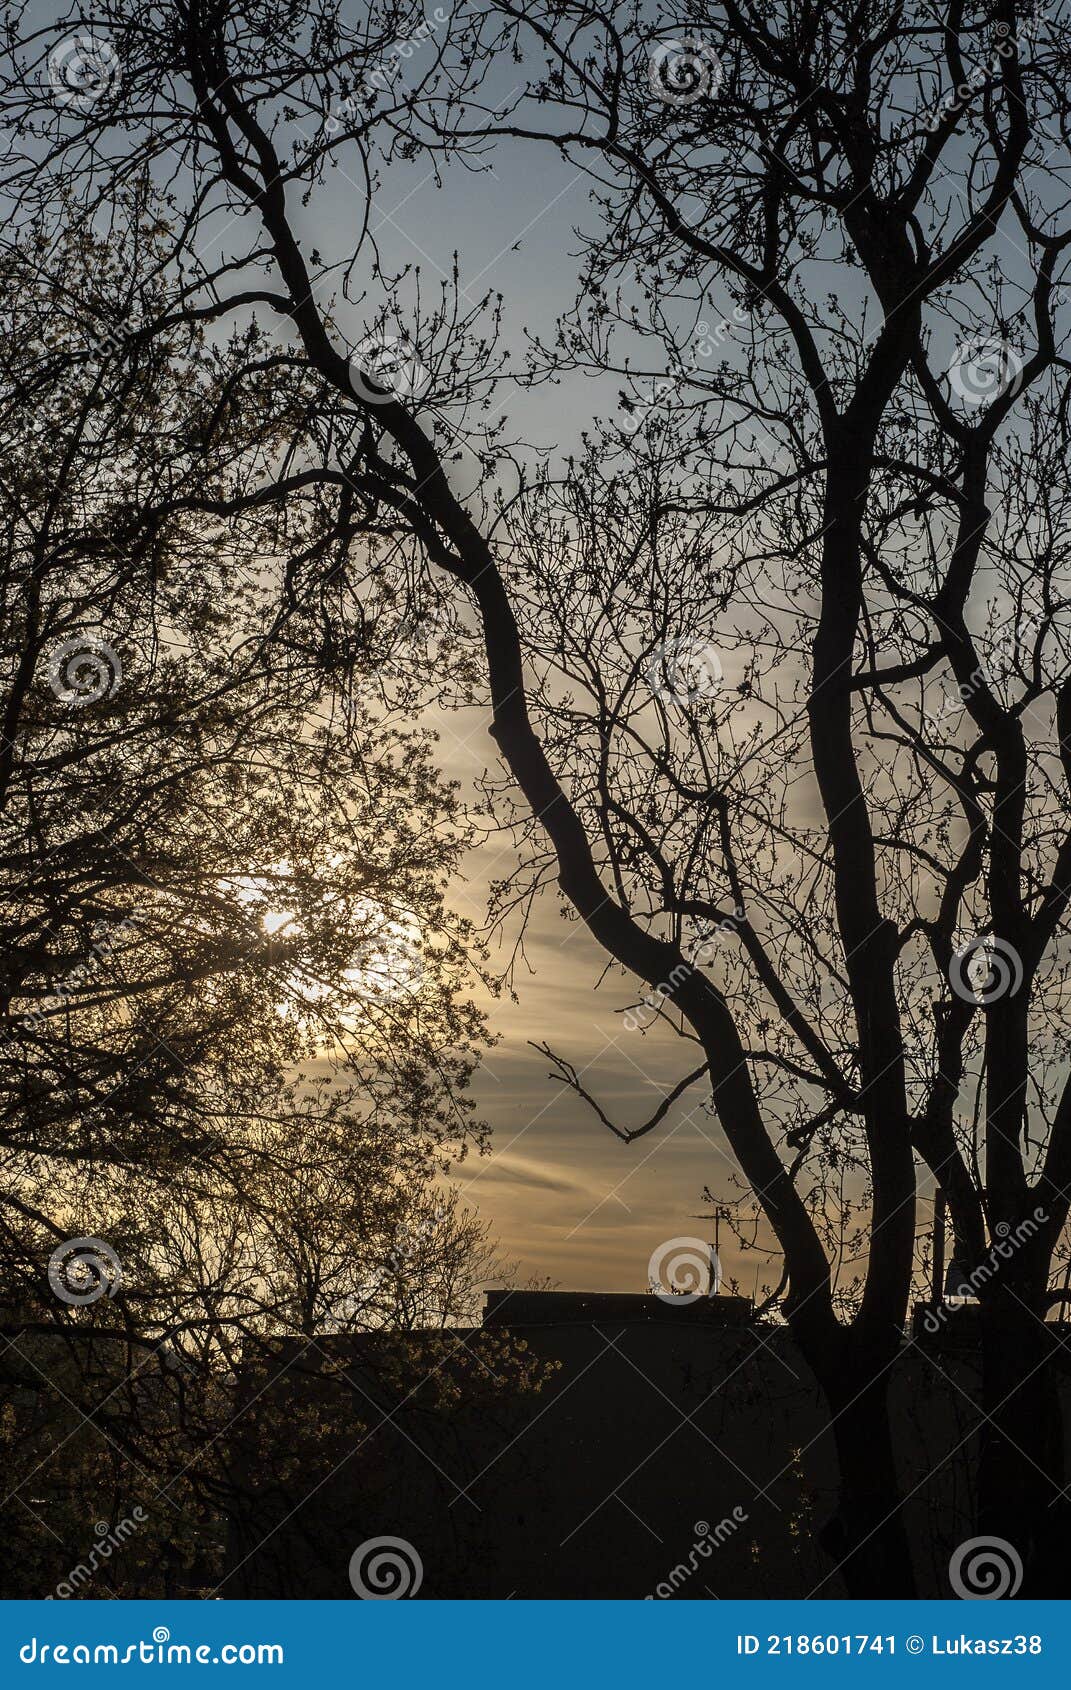 sunset, sun, trees, contrast, sky, branches, mood, anxiety, sky,